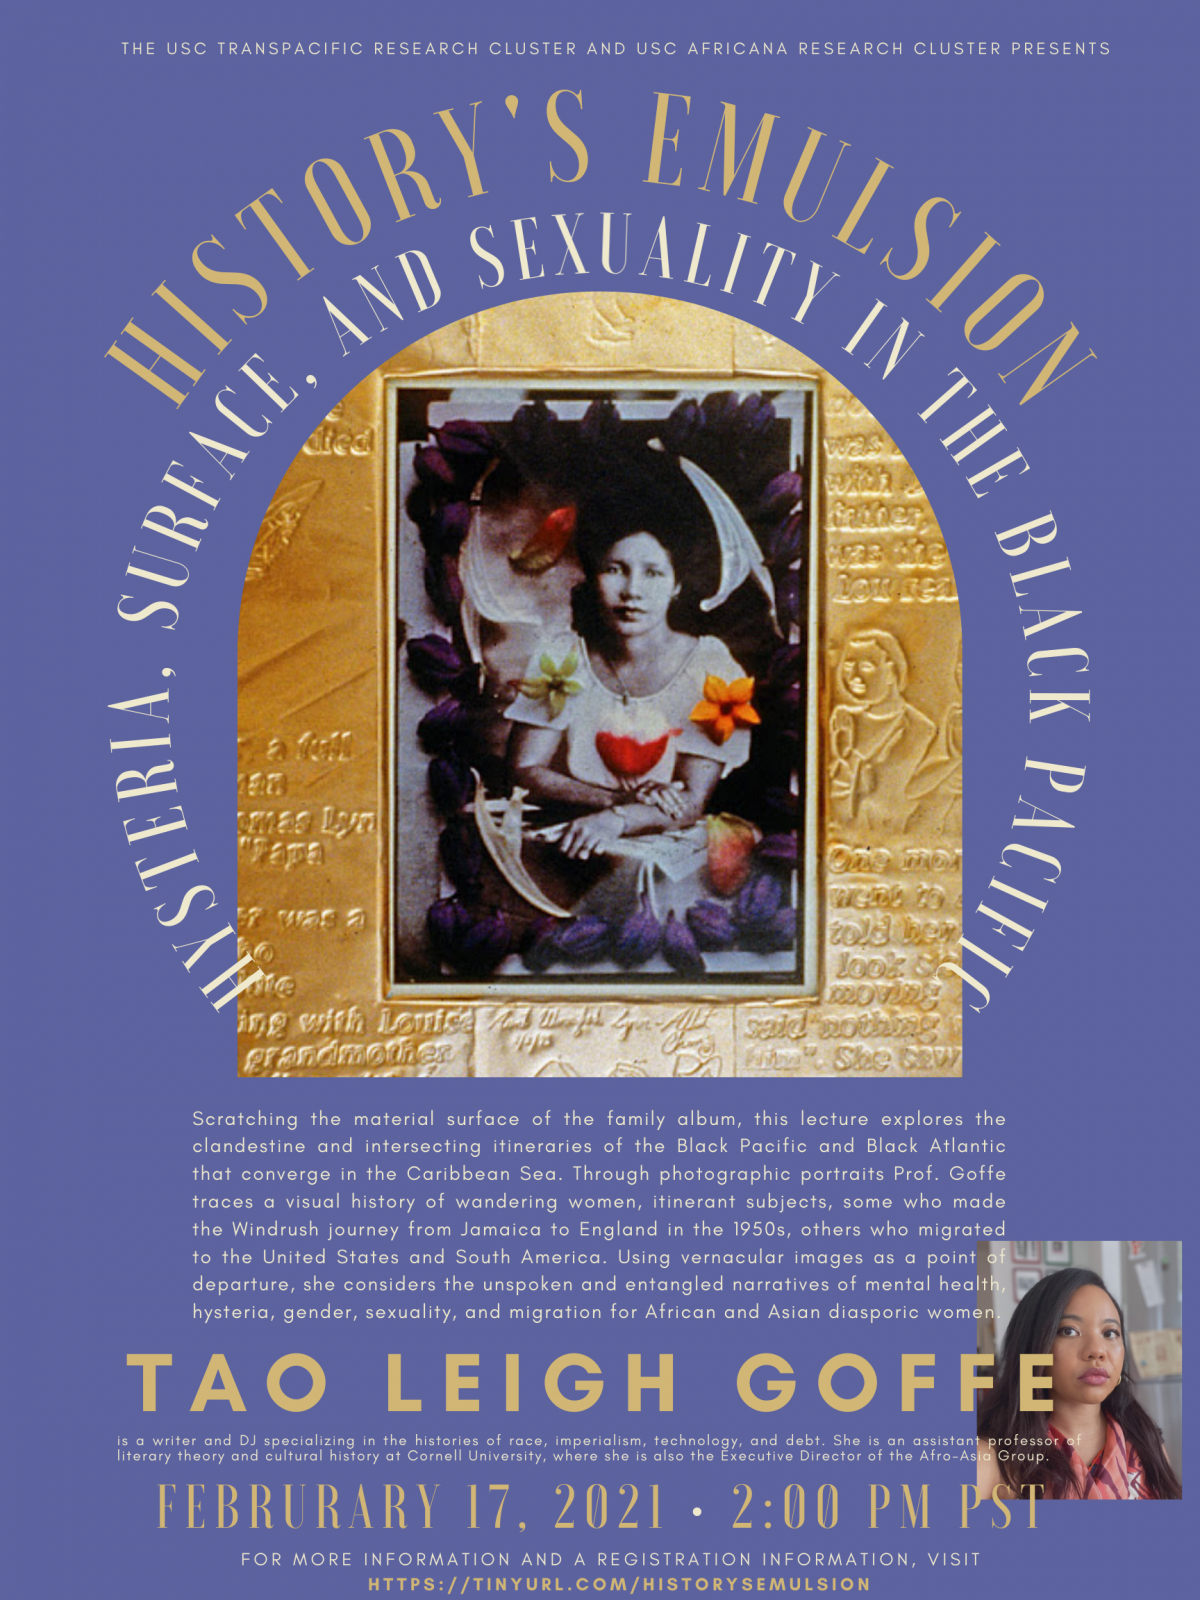 Tao Leigh Goff Event Poster